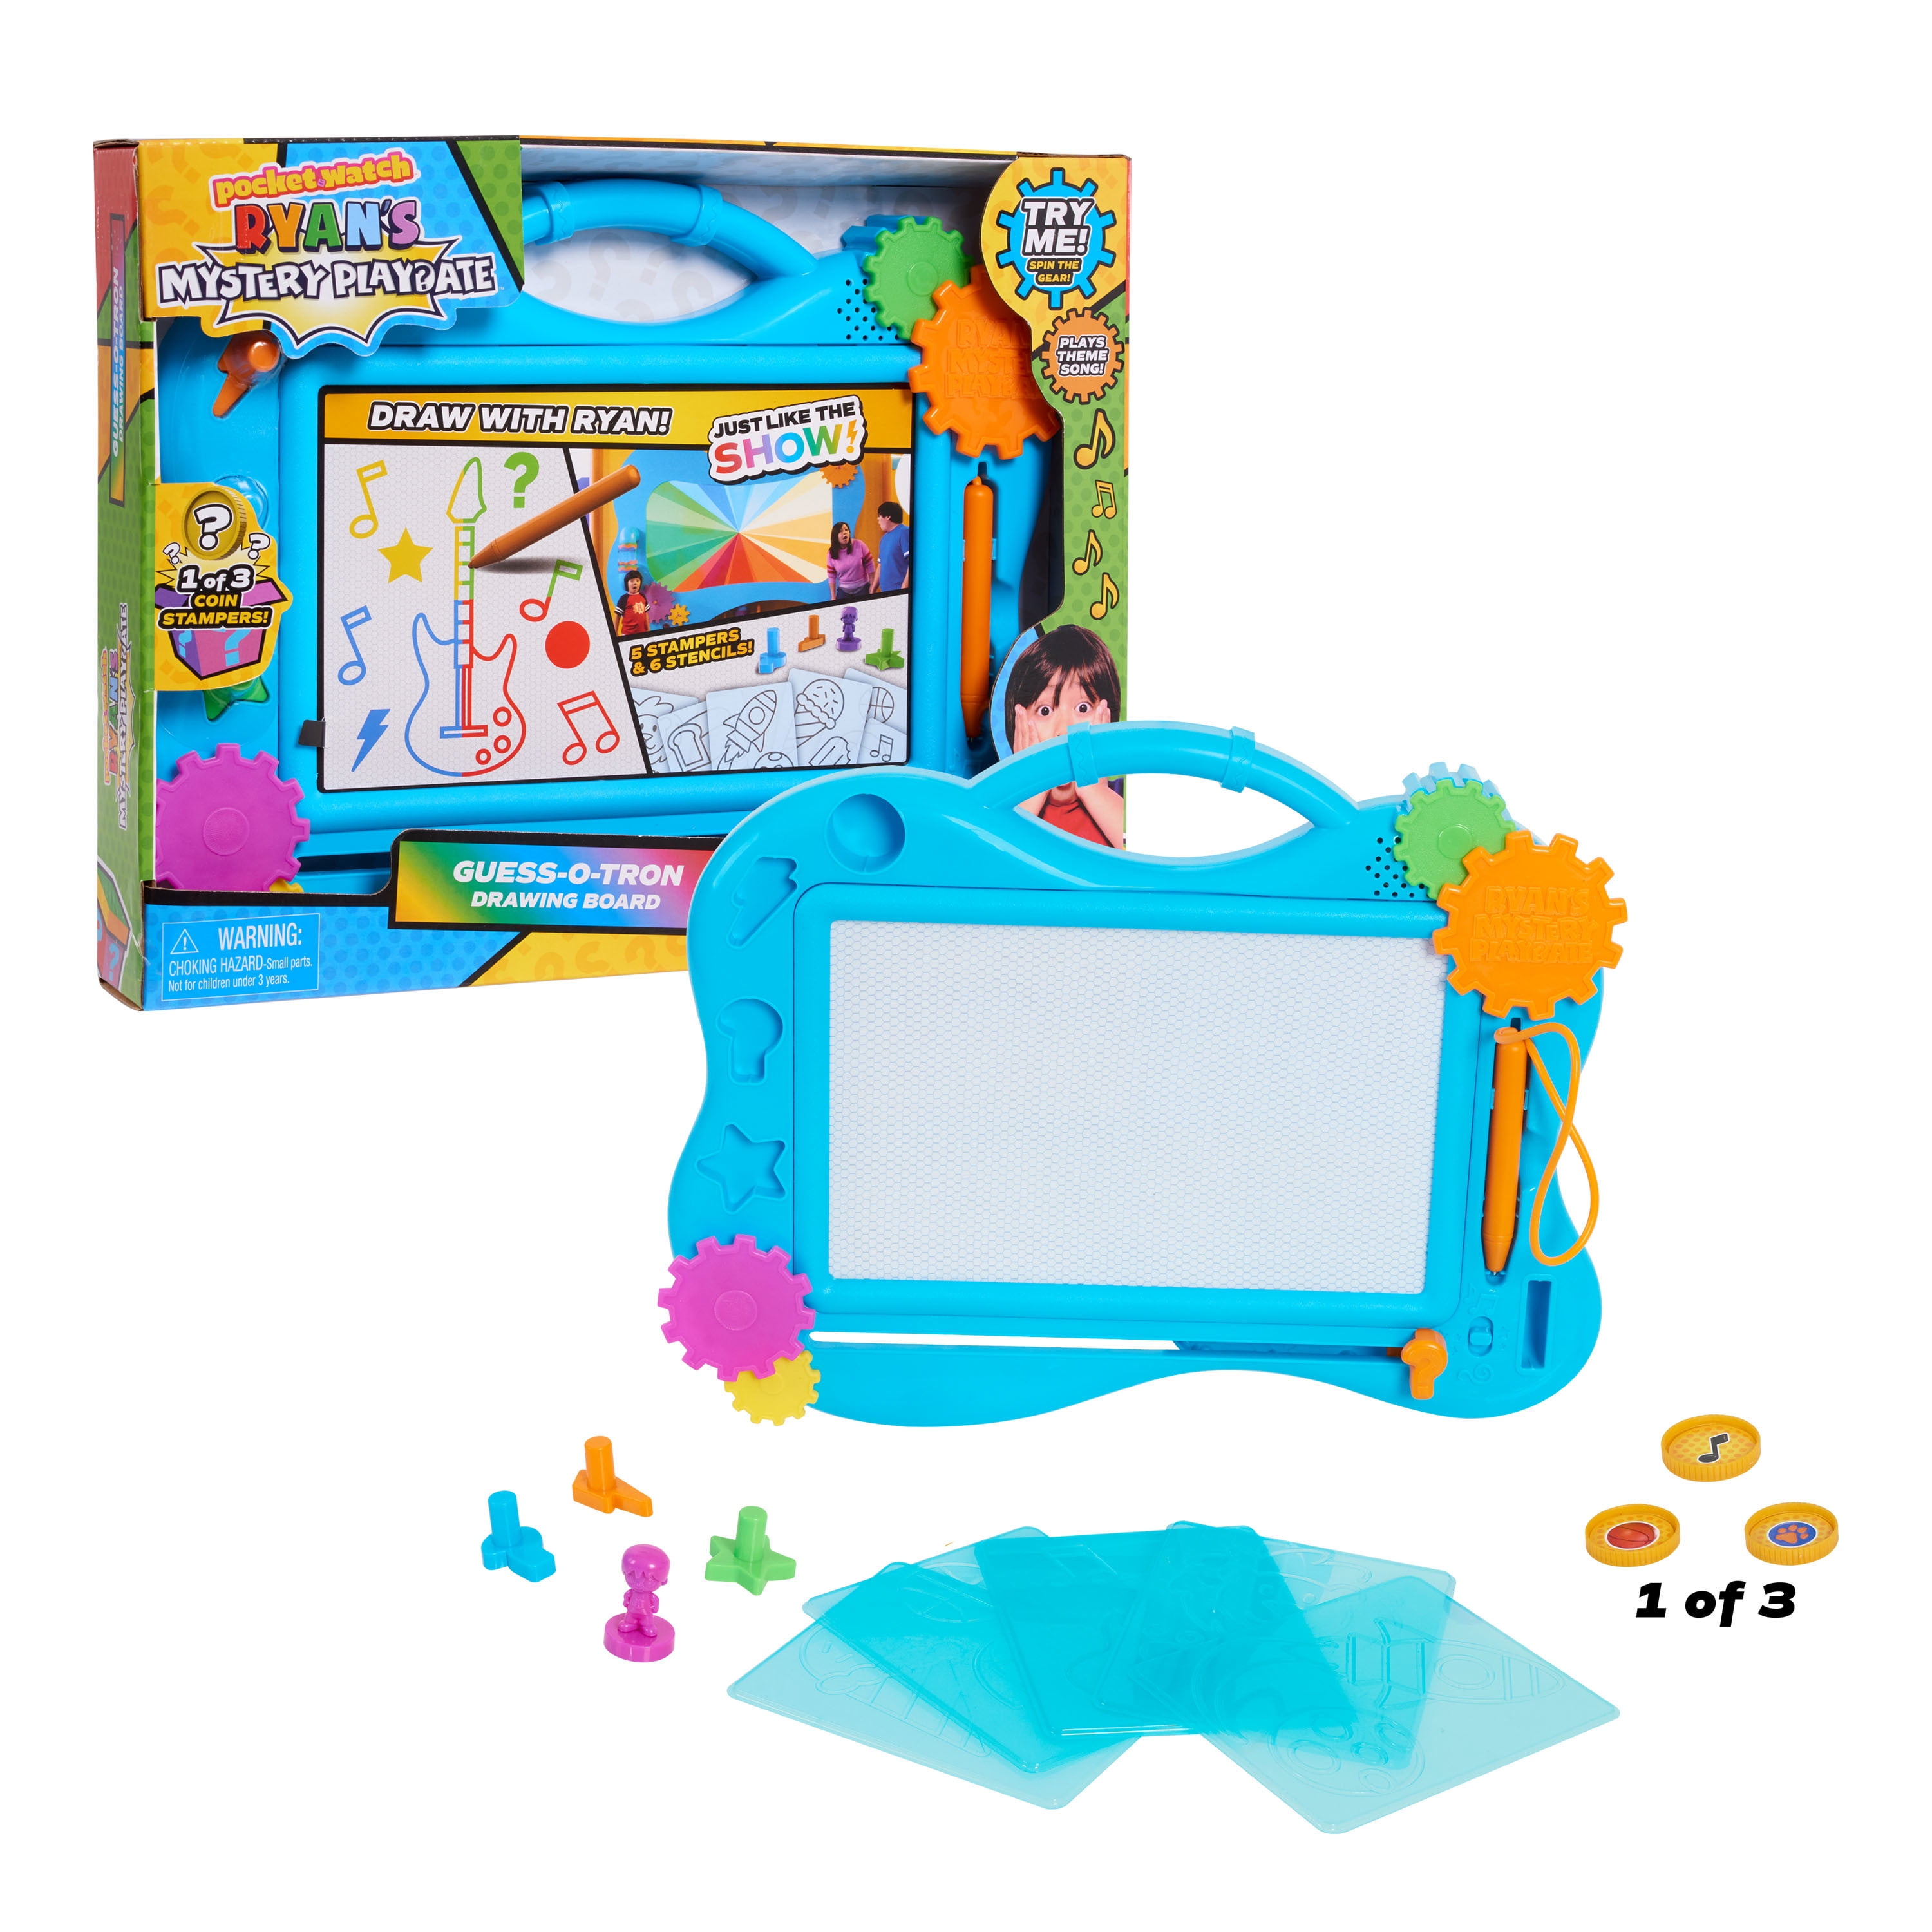 at donere Sanktion kage Ryan's Mystery Playdate Guess-O-Tron Drawing Board, Role Play, Ages 3 Up,  by Just Play - Walmart.com